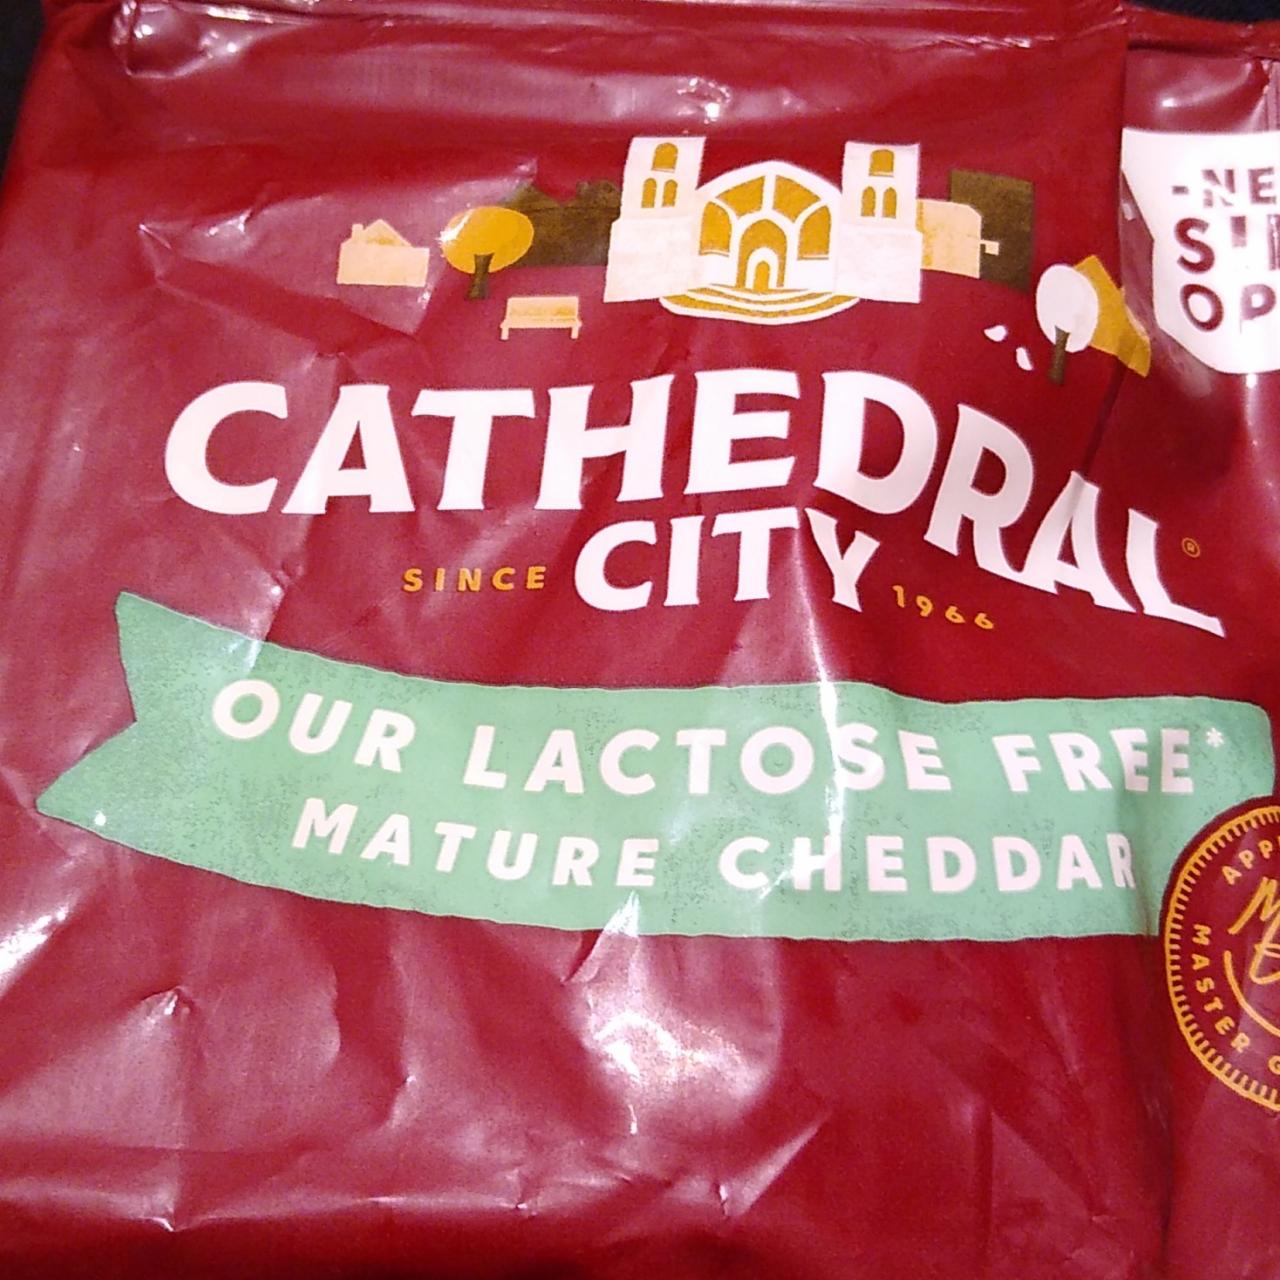 Fotografie - Lactose free mature cheddar Cathedral city